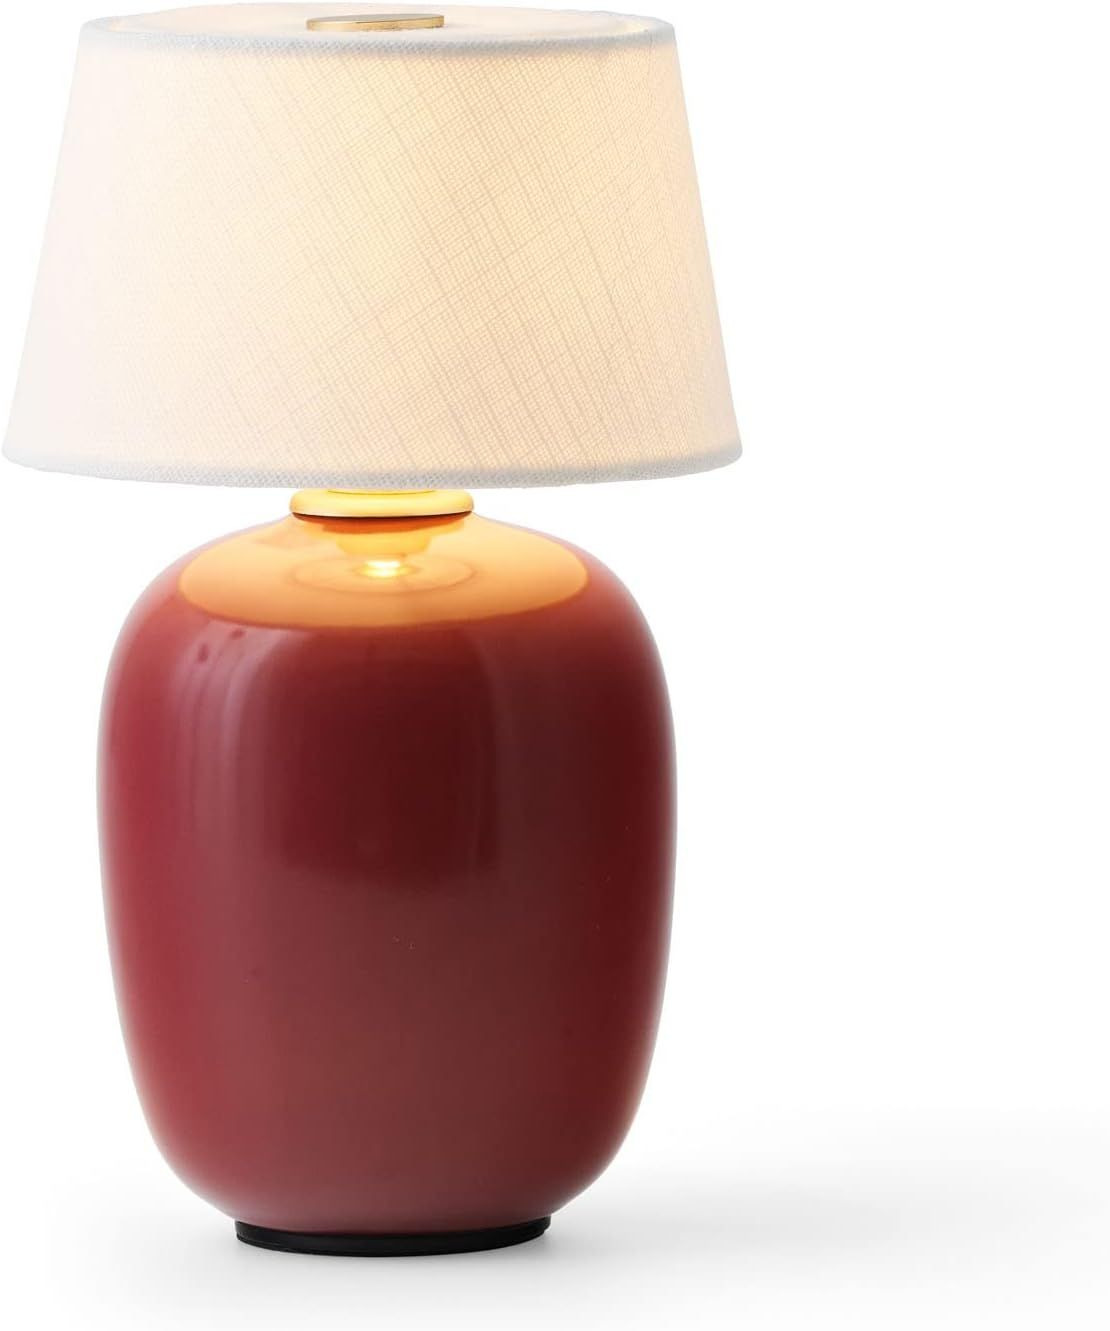 Menu Torso, Portable Lamp, Size - 7.8 inch, Dimmable and 7.8inch, Ruby 